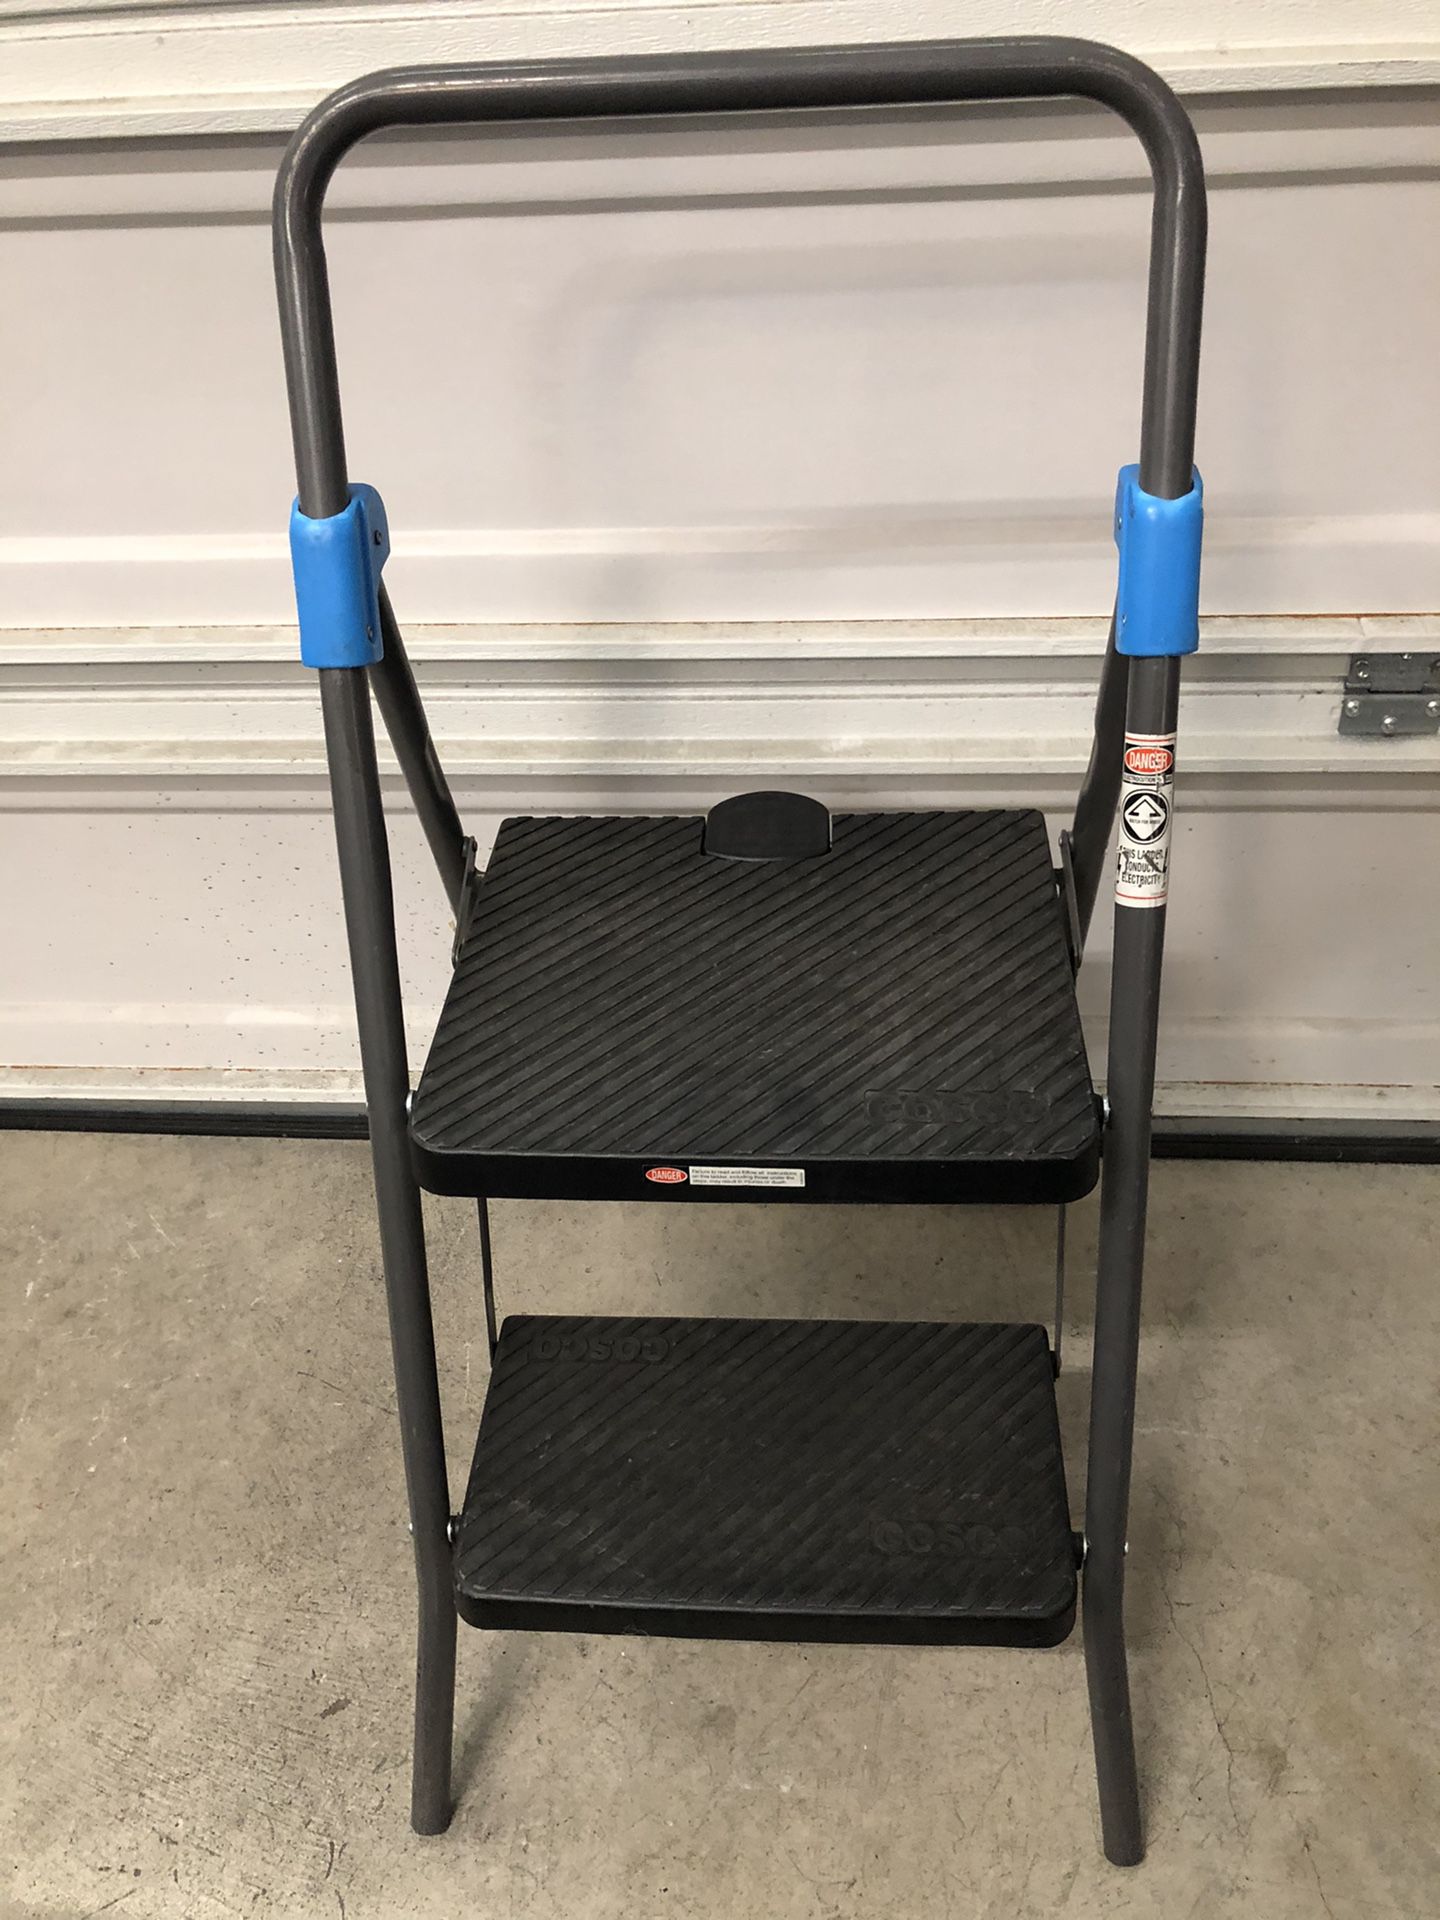 Cosco Commercial 2 Step Ladder